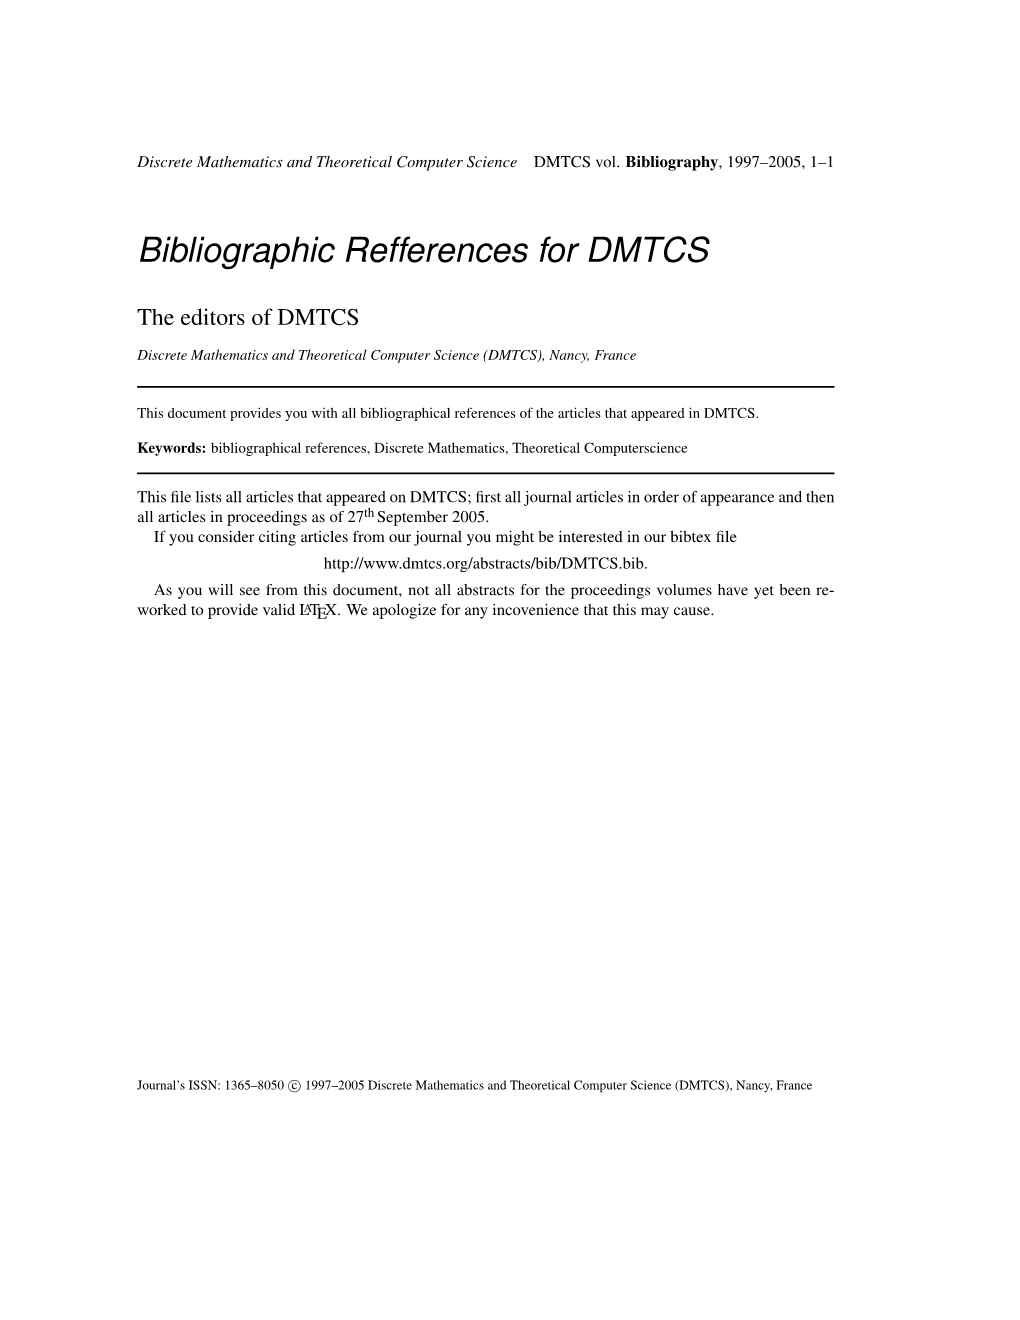 Bibliographic Refferences for DMTCS